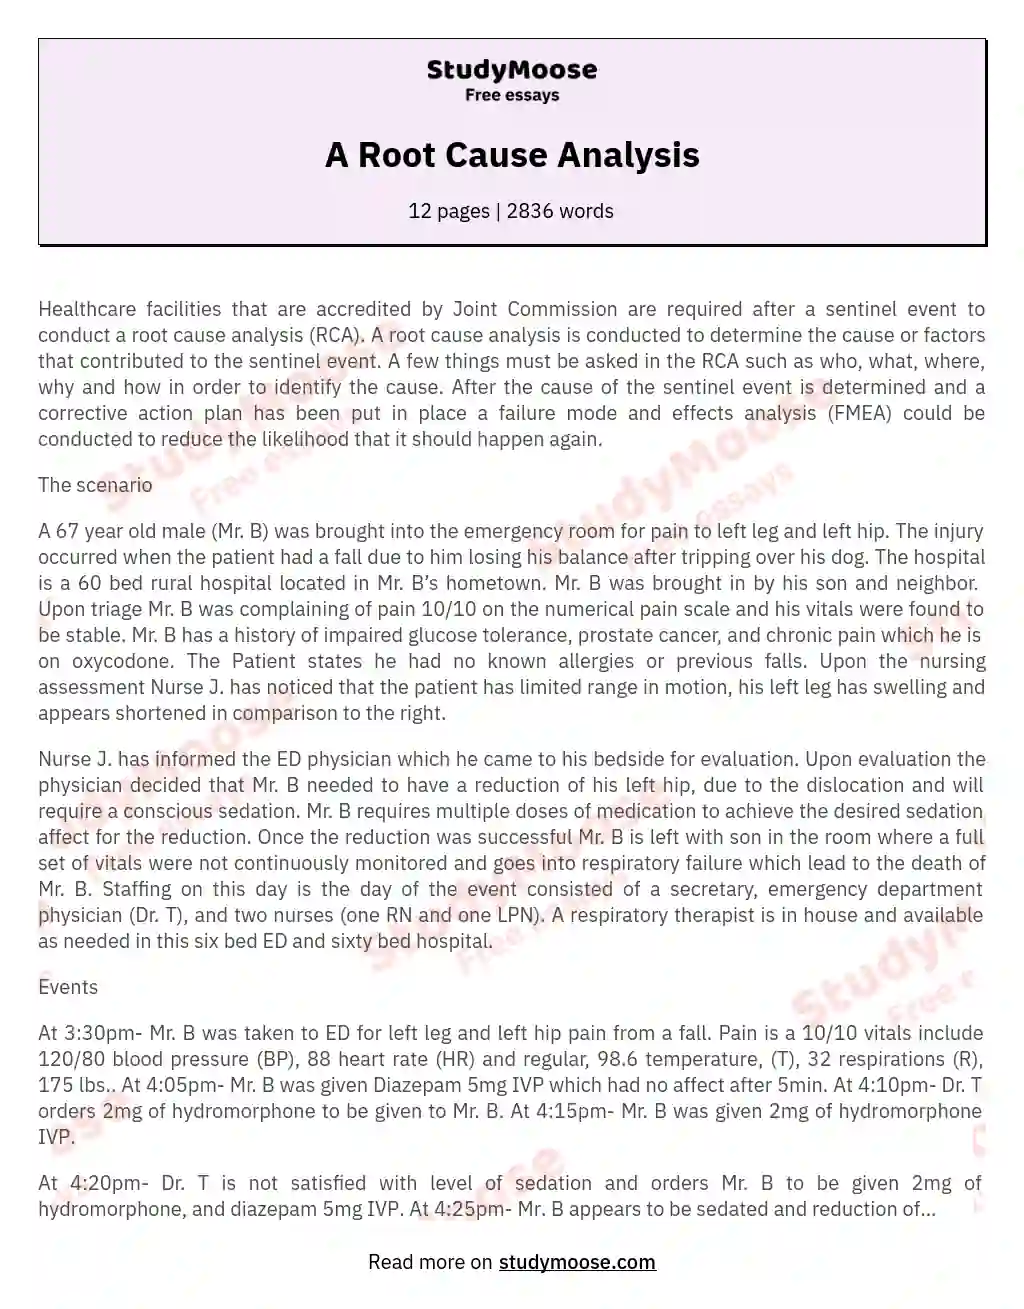 root cause analysis essay example